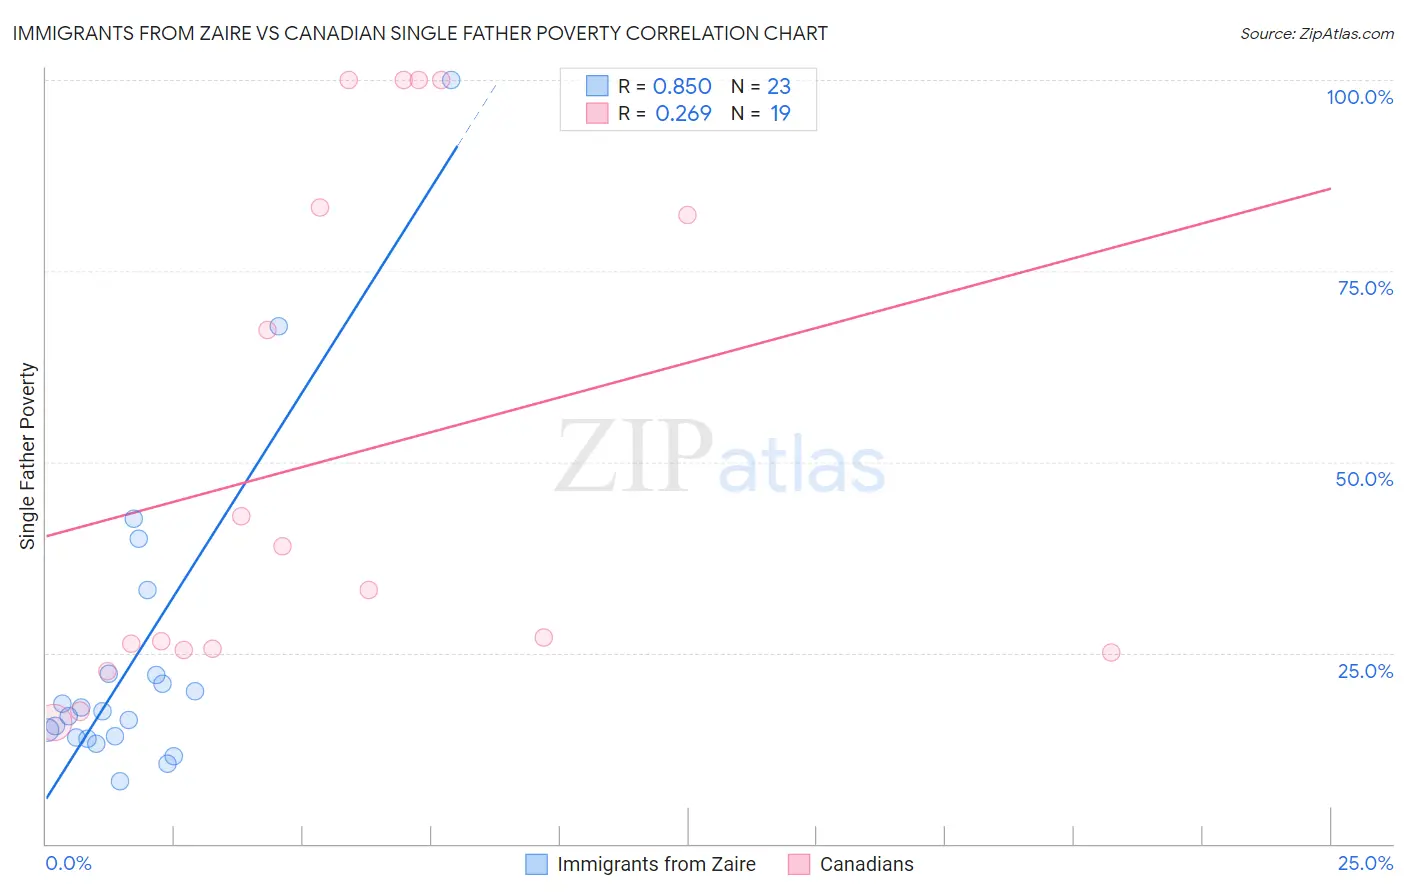 Immigrants from Zaire vs Canadian Single Father Poverty